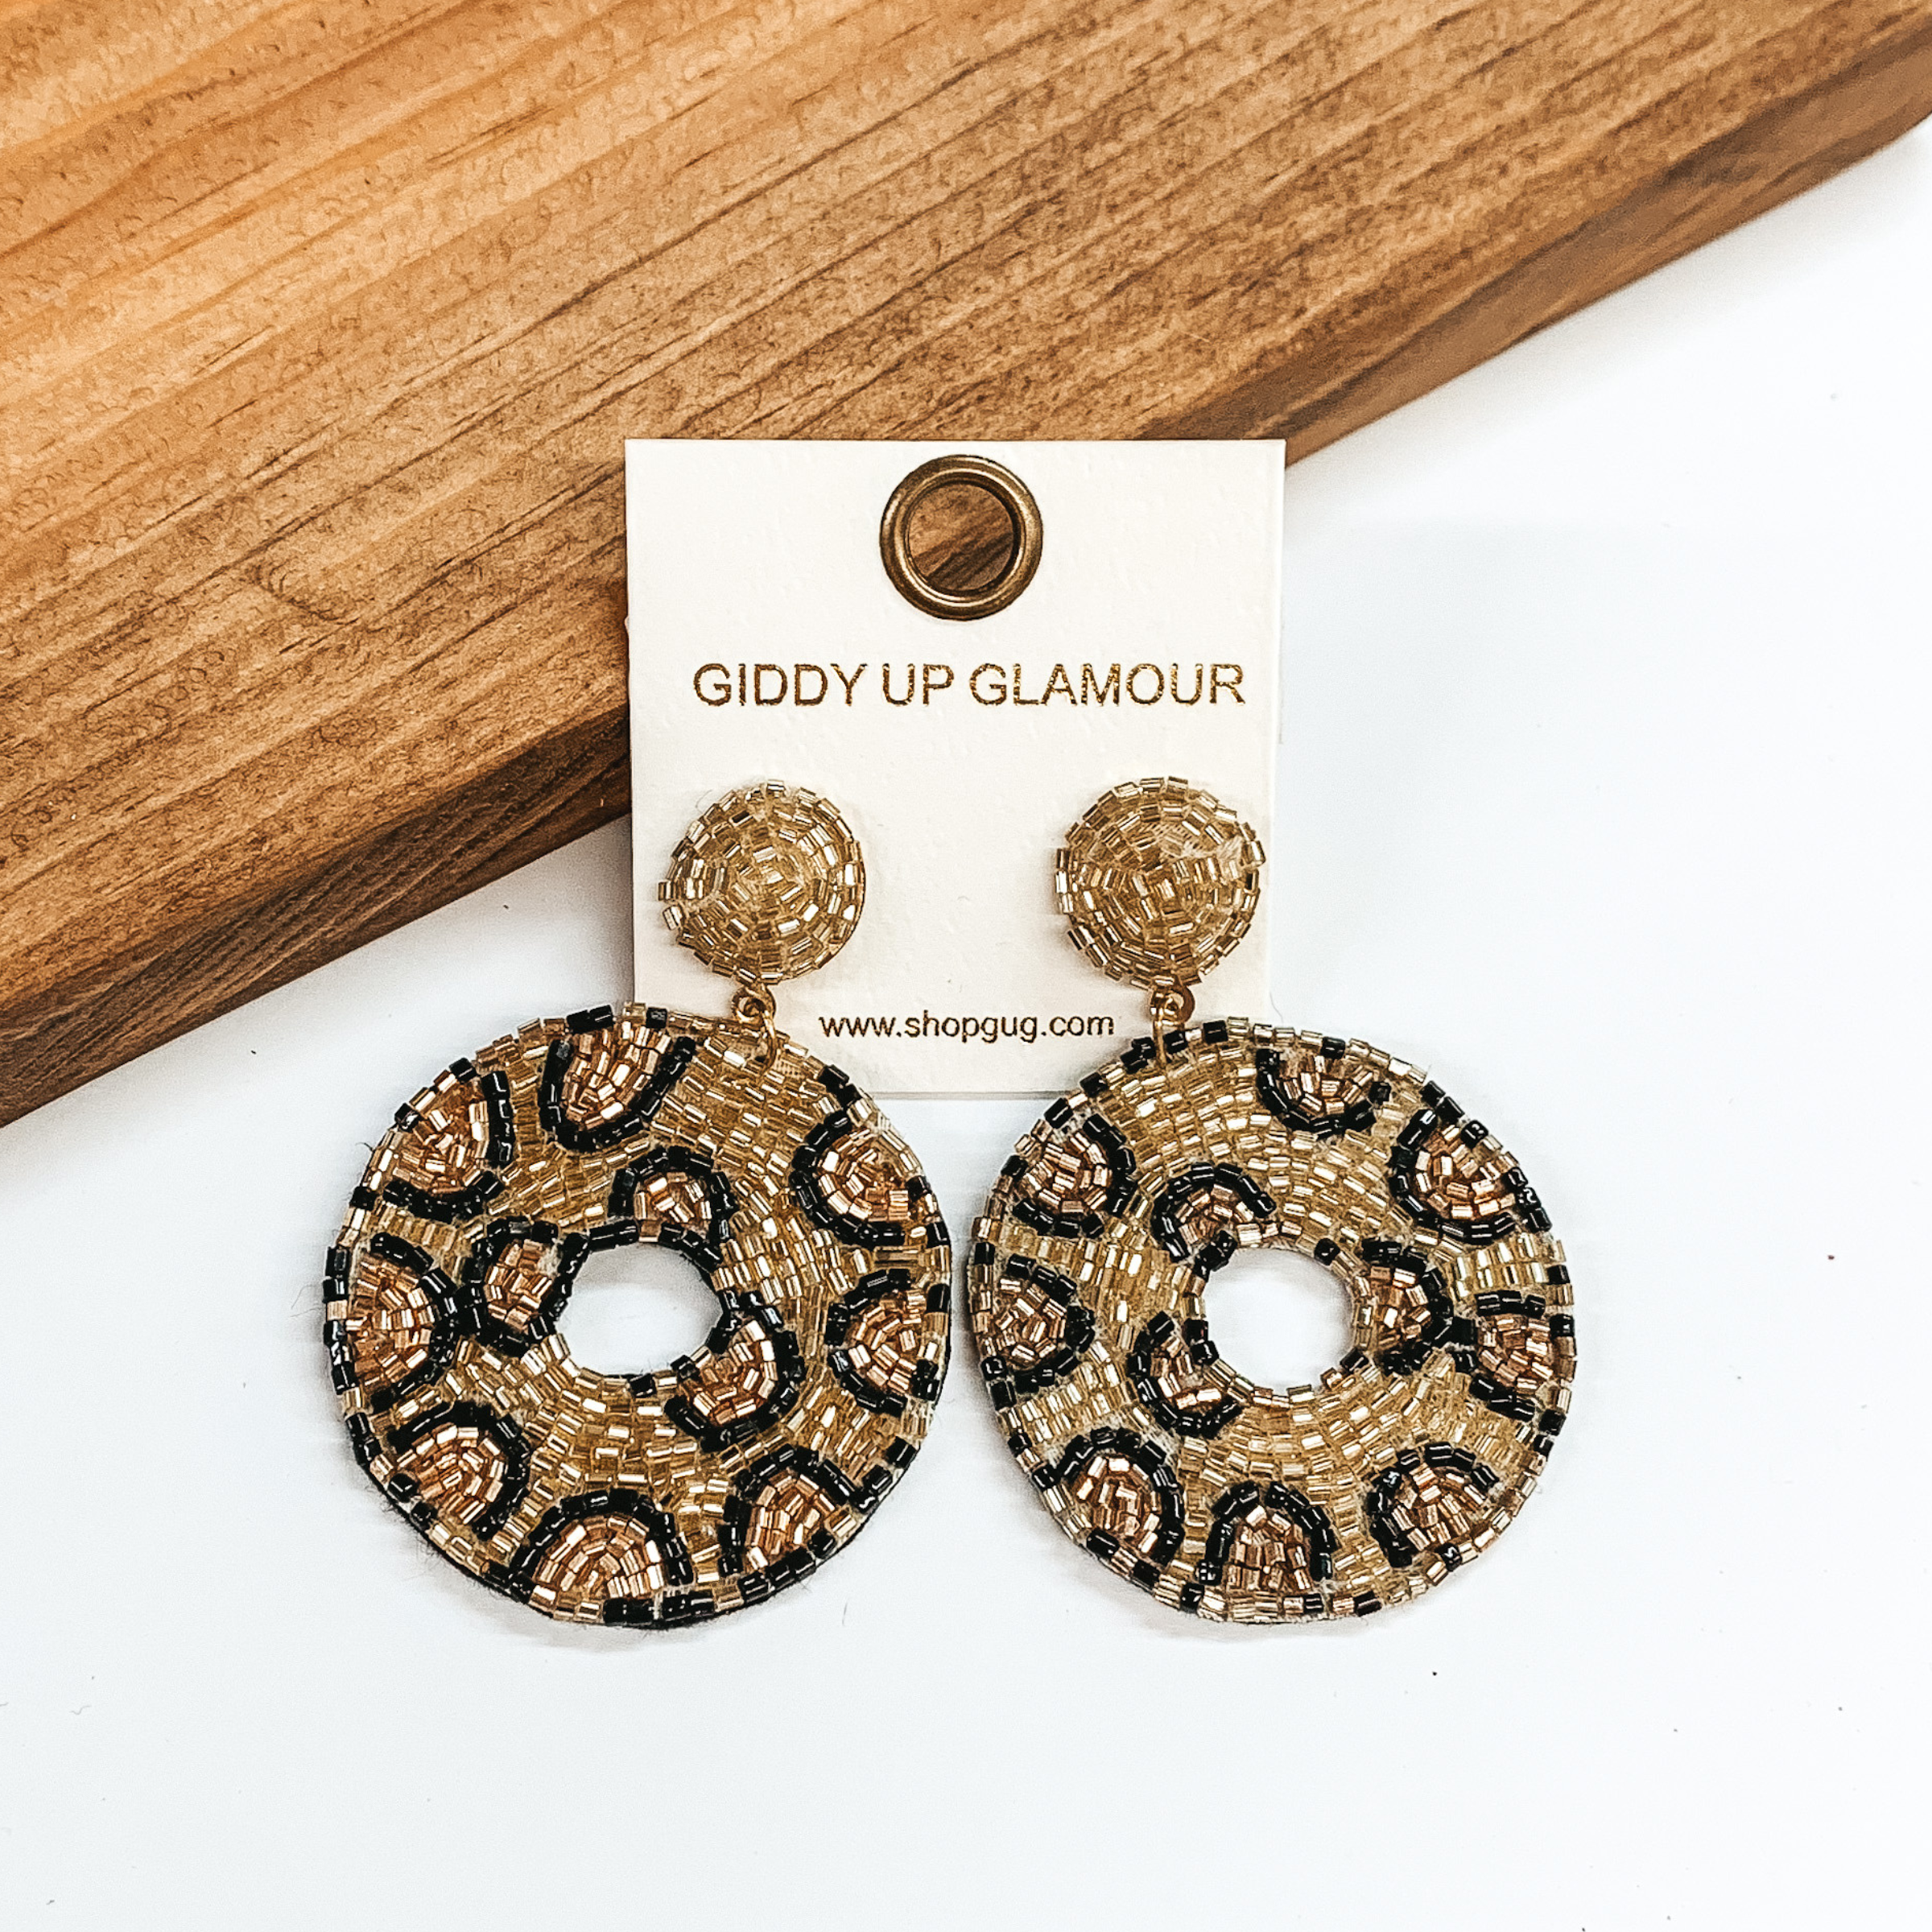 White circle beaded post back earrings in gold. These earrings include a beaded drop circle in gold with a leopard print. These earrings are pictured on a white and brown wood background.